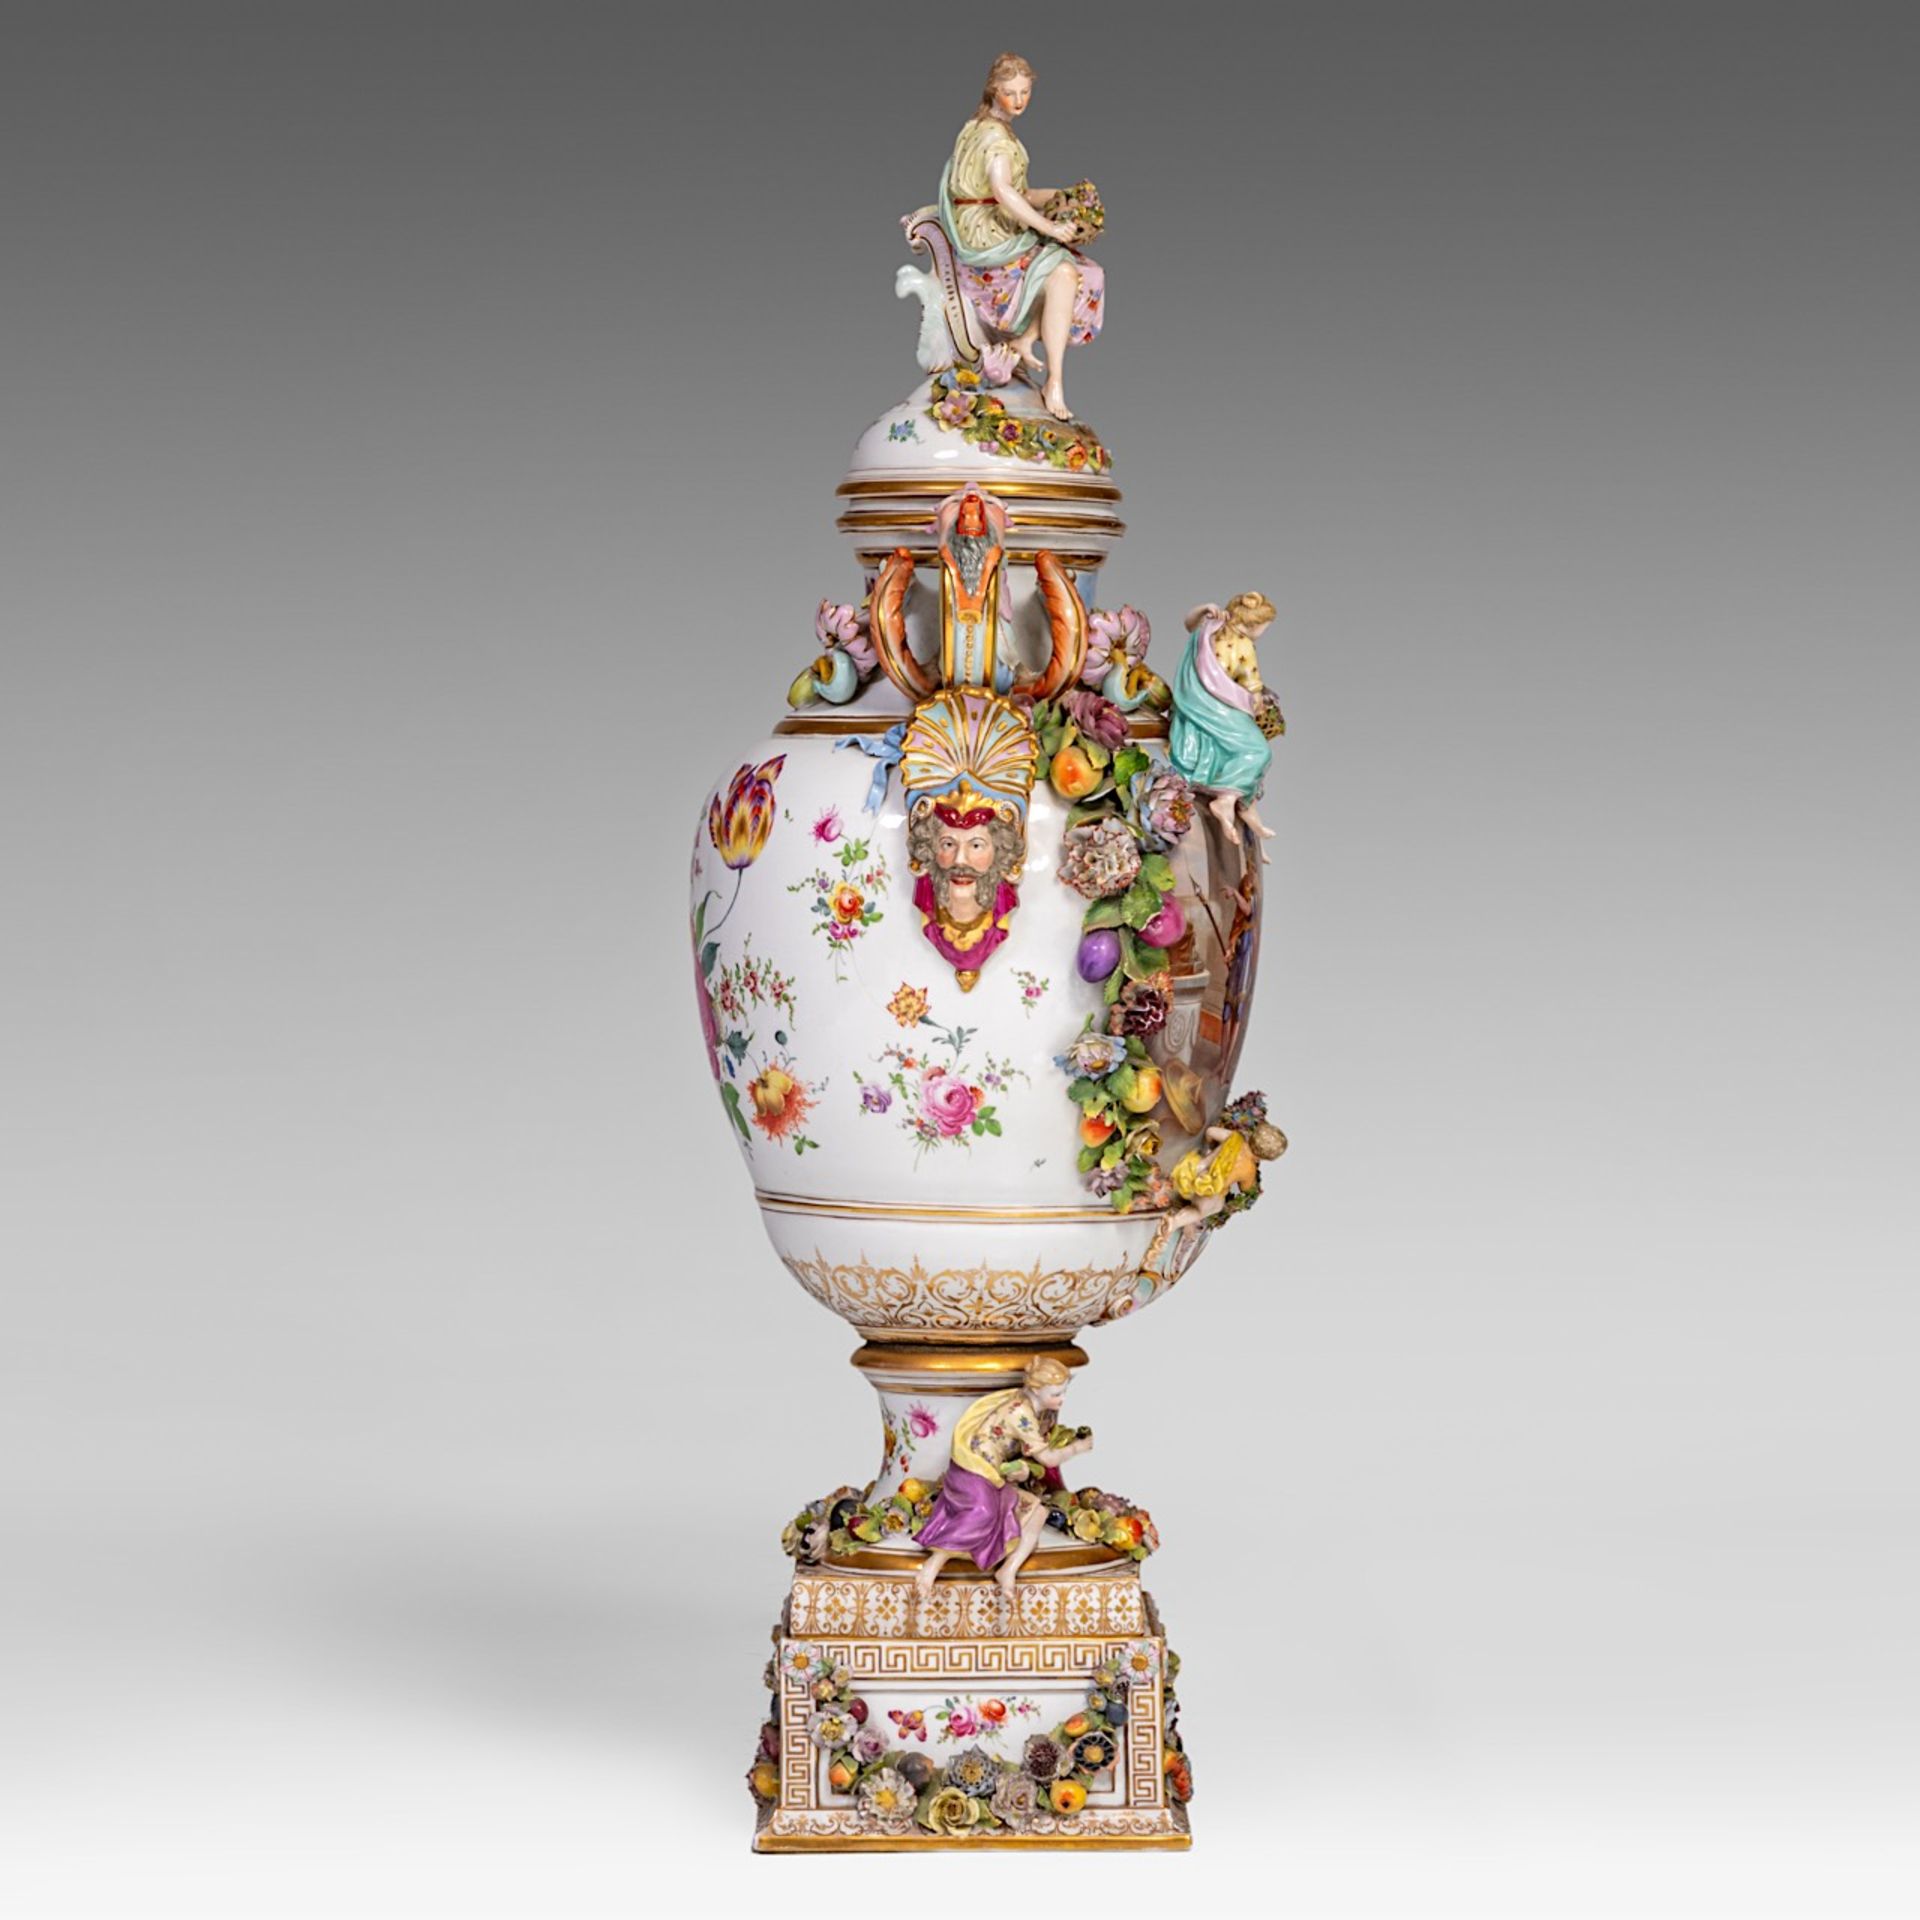 A very imposing Saxony porcelain vase on stand, Postschappel manufactory, Dresden, H 107 cm (total) - Image 5 of 23